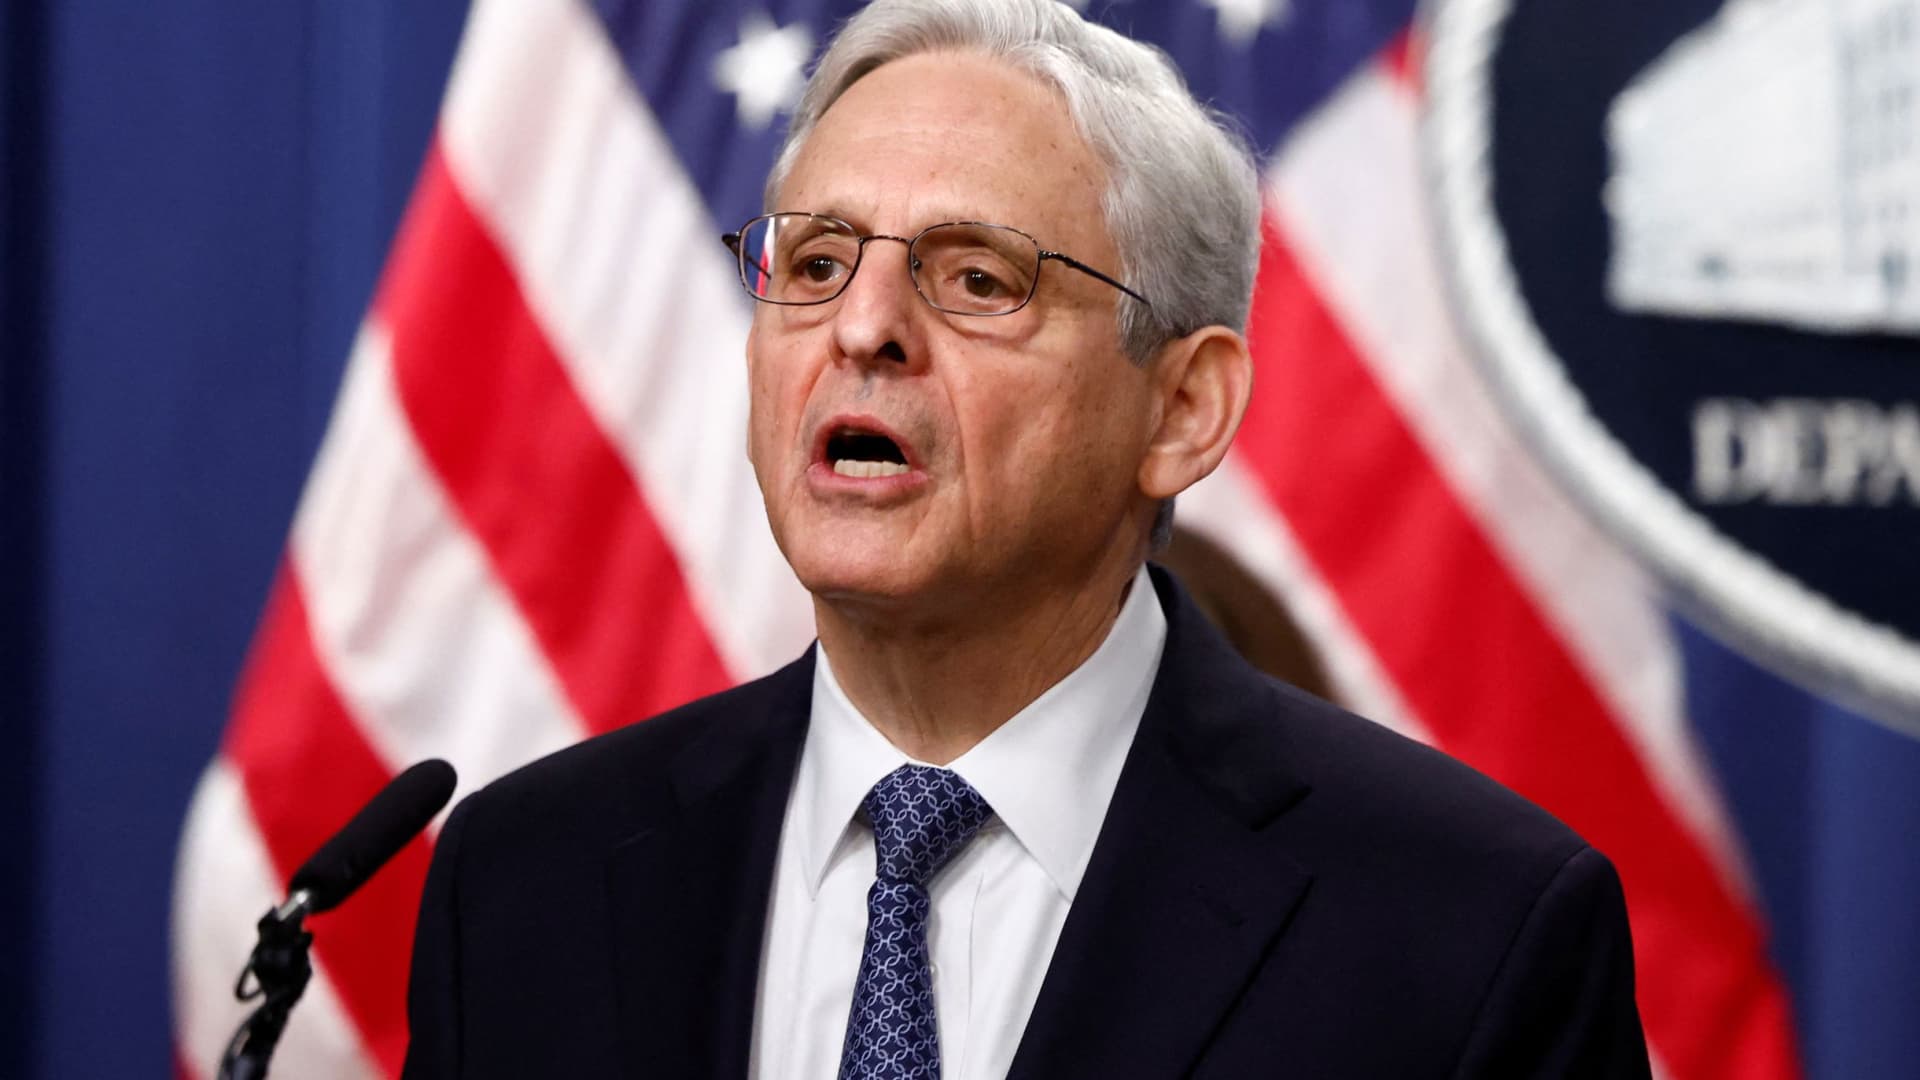 U.S. Attorney General Merrick Garland announces his appointment of Jack Smith as a special counsel for the investigations into the actions of former President Donald Trump, in the briefing room of the U.S. Justice Department in Washington, November 18, 2022.